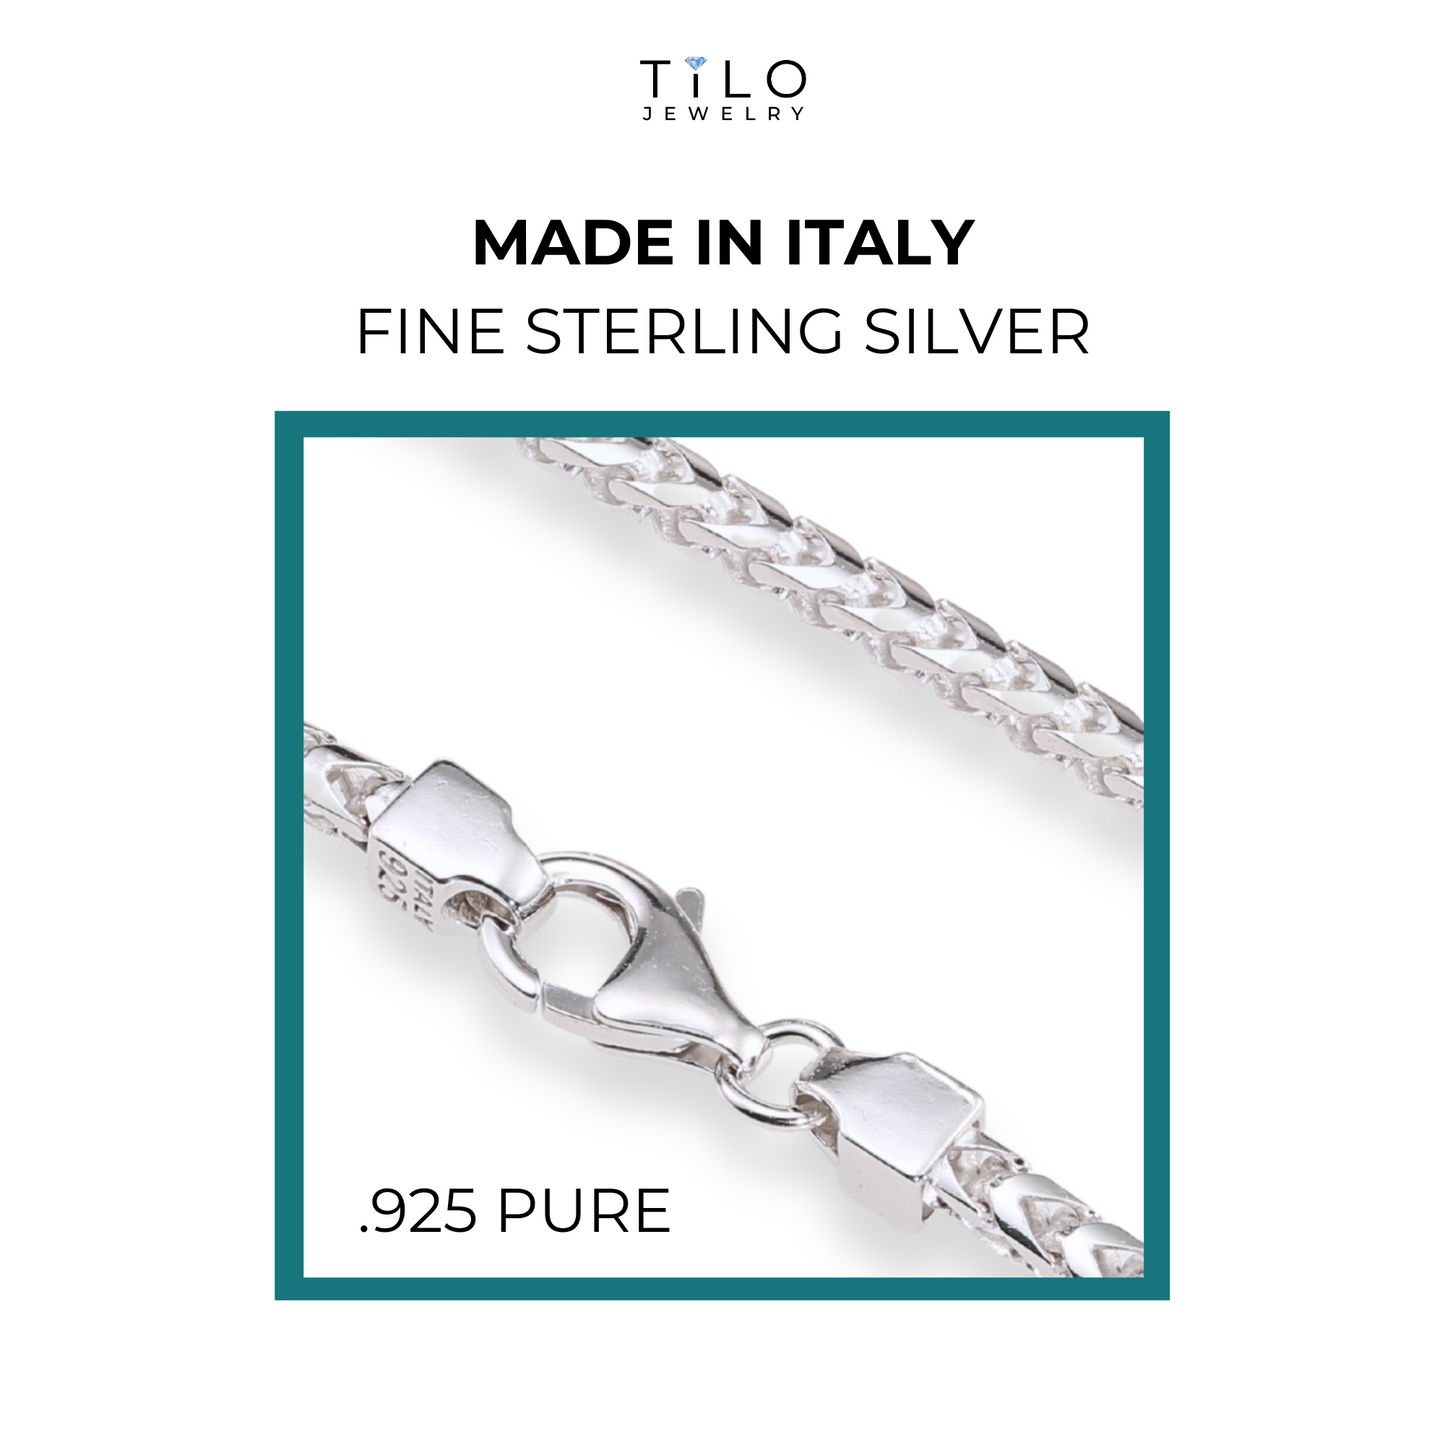 925 Italian Franco Chains, Sterling Silver with Lobster Locks, Made in Italy